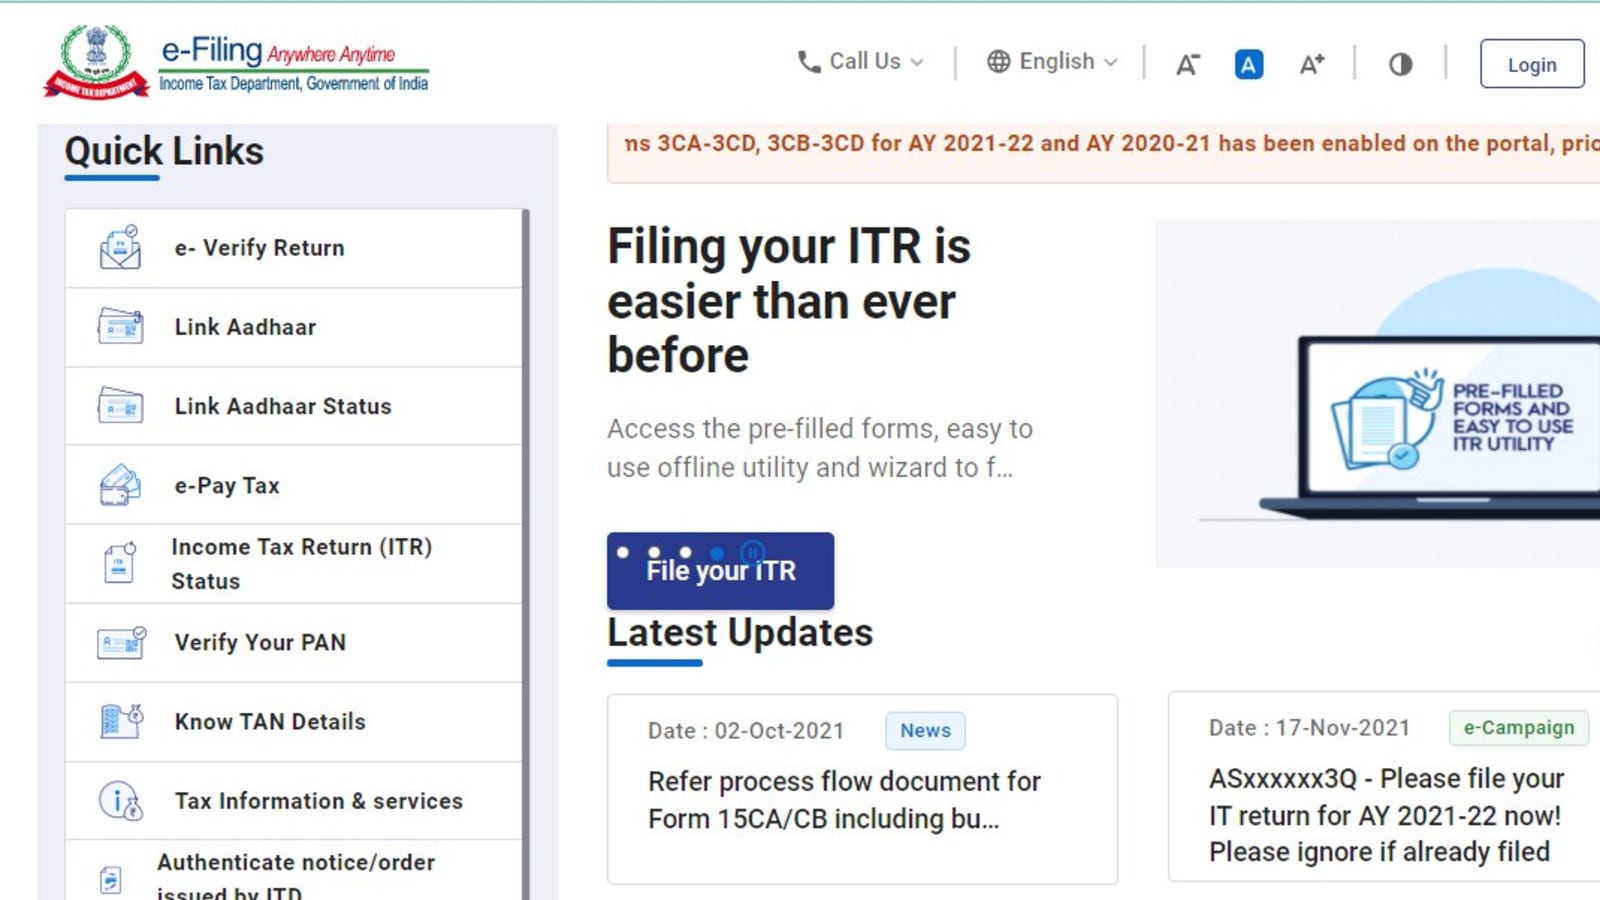 How to file Tax Returns online for free before Dec 31 deadline